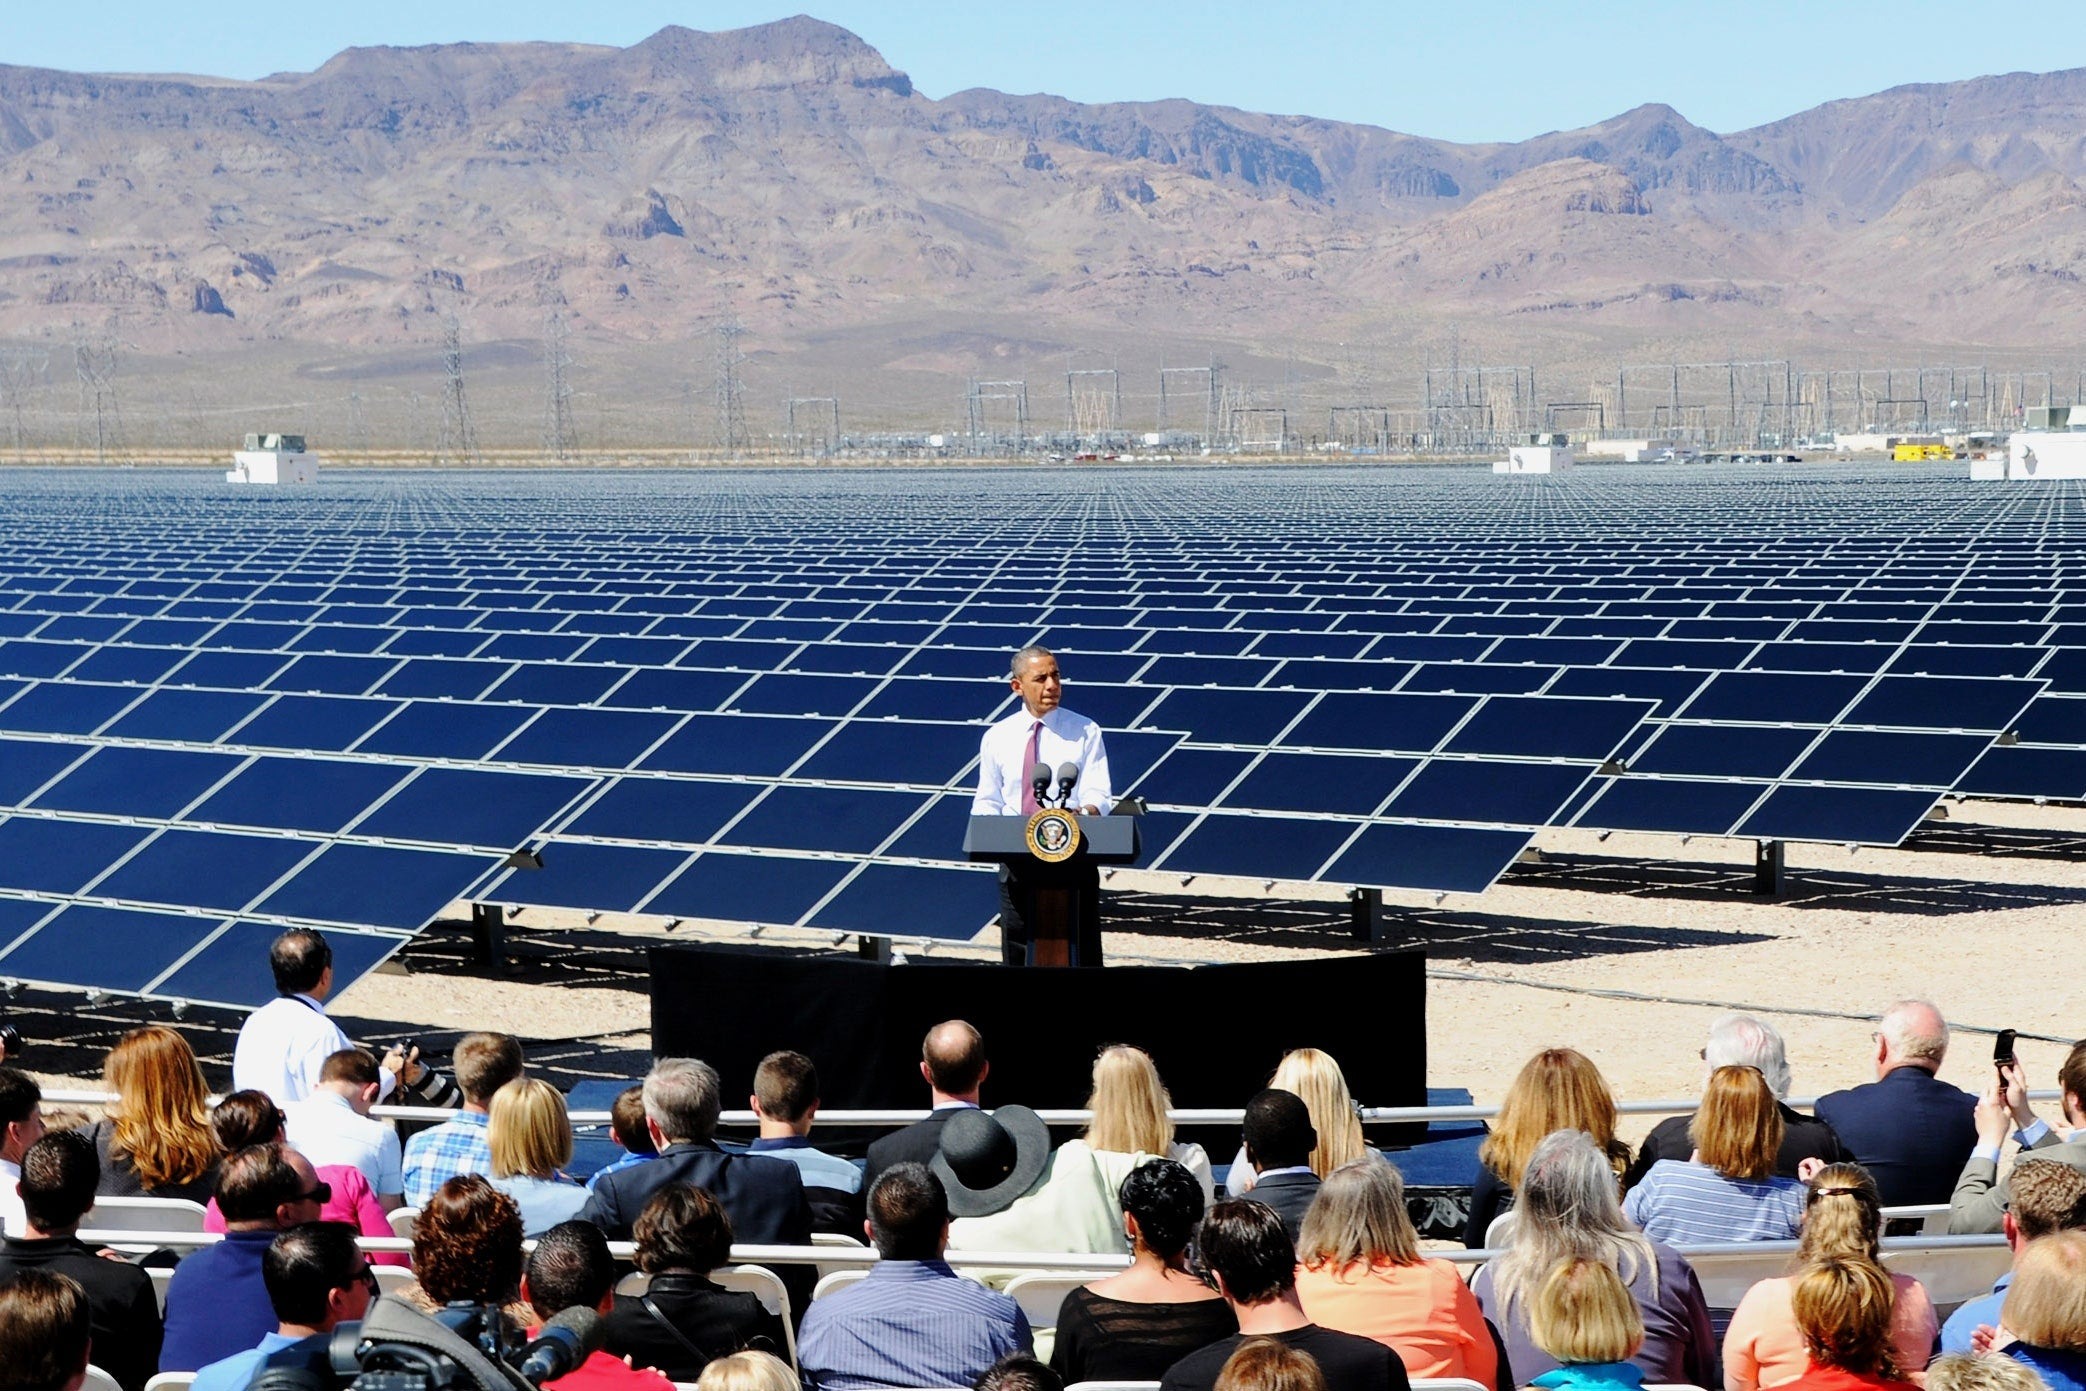 President Obama standing in front of ground mounted solar panels